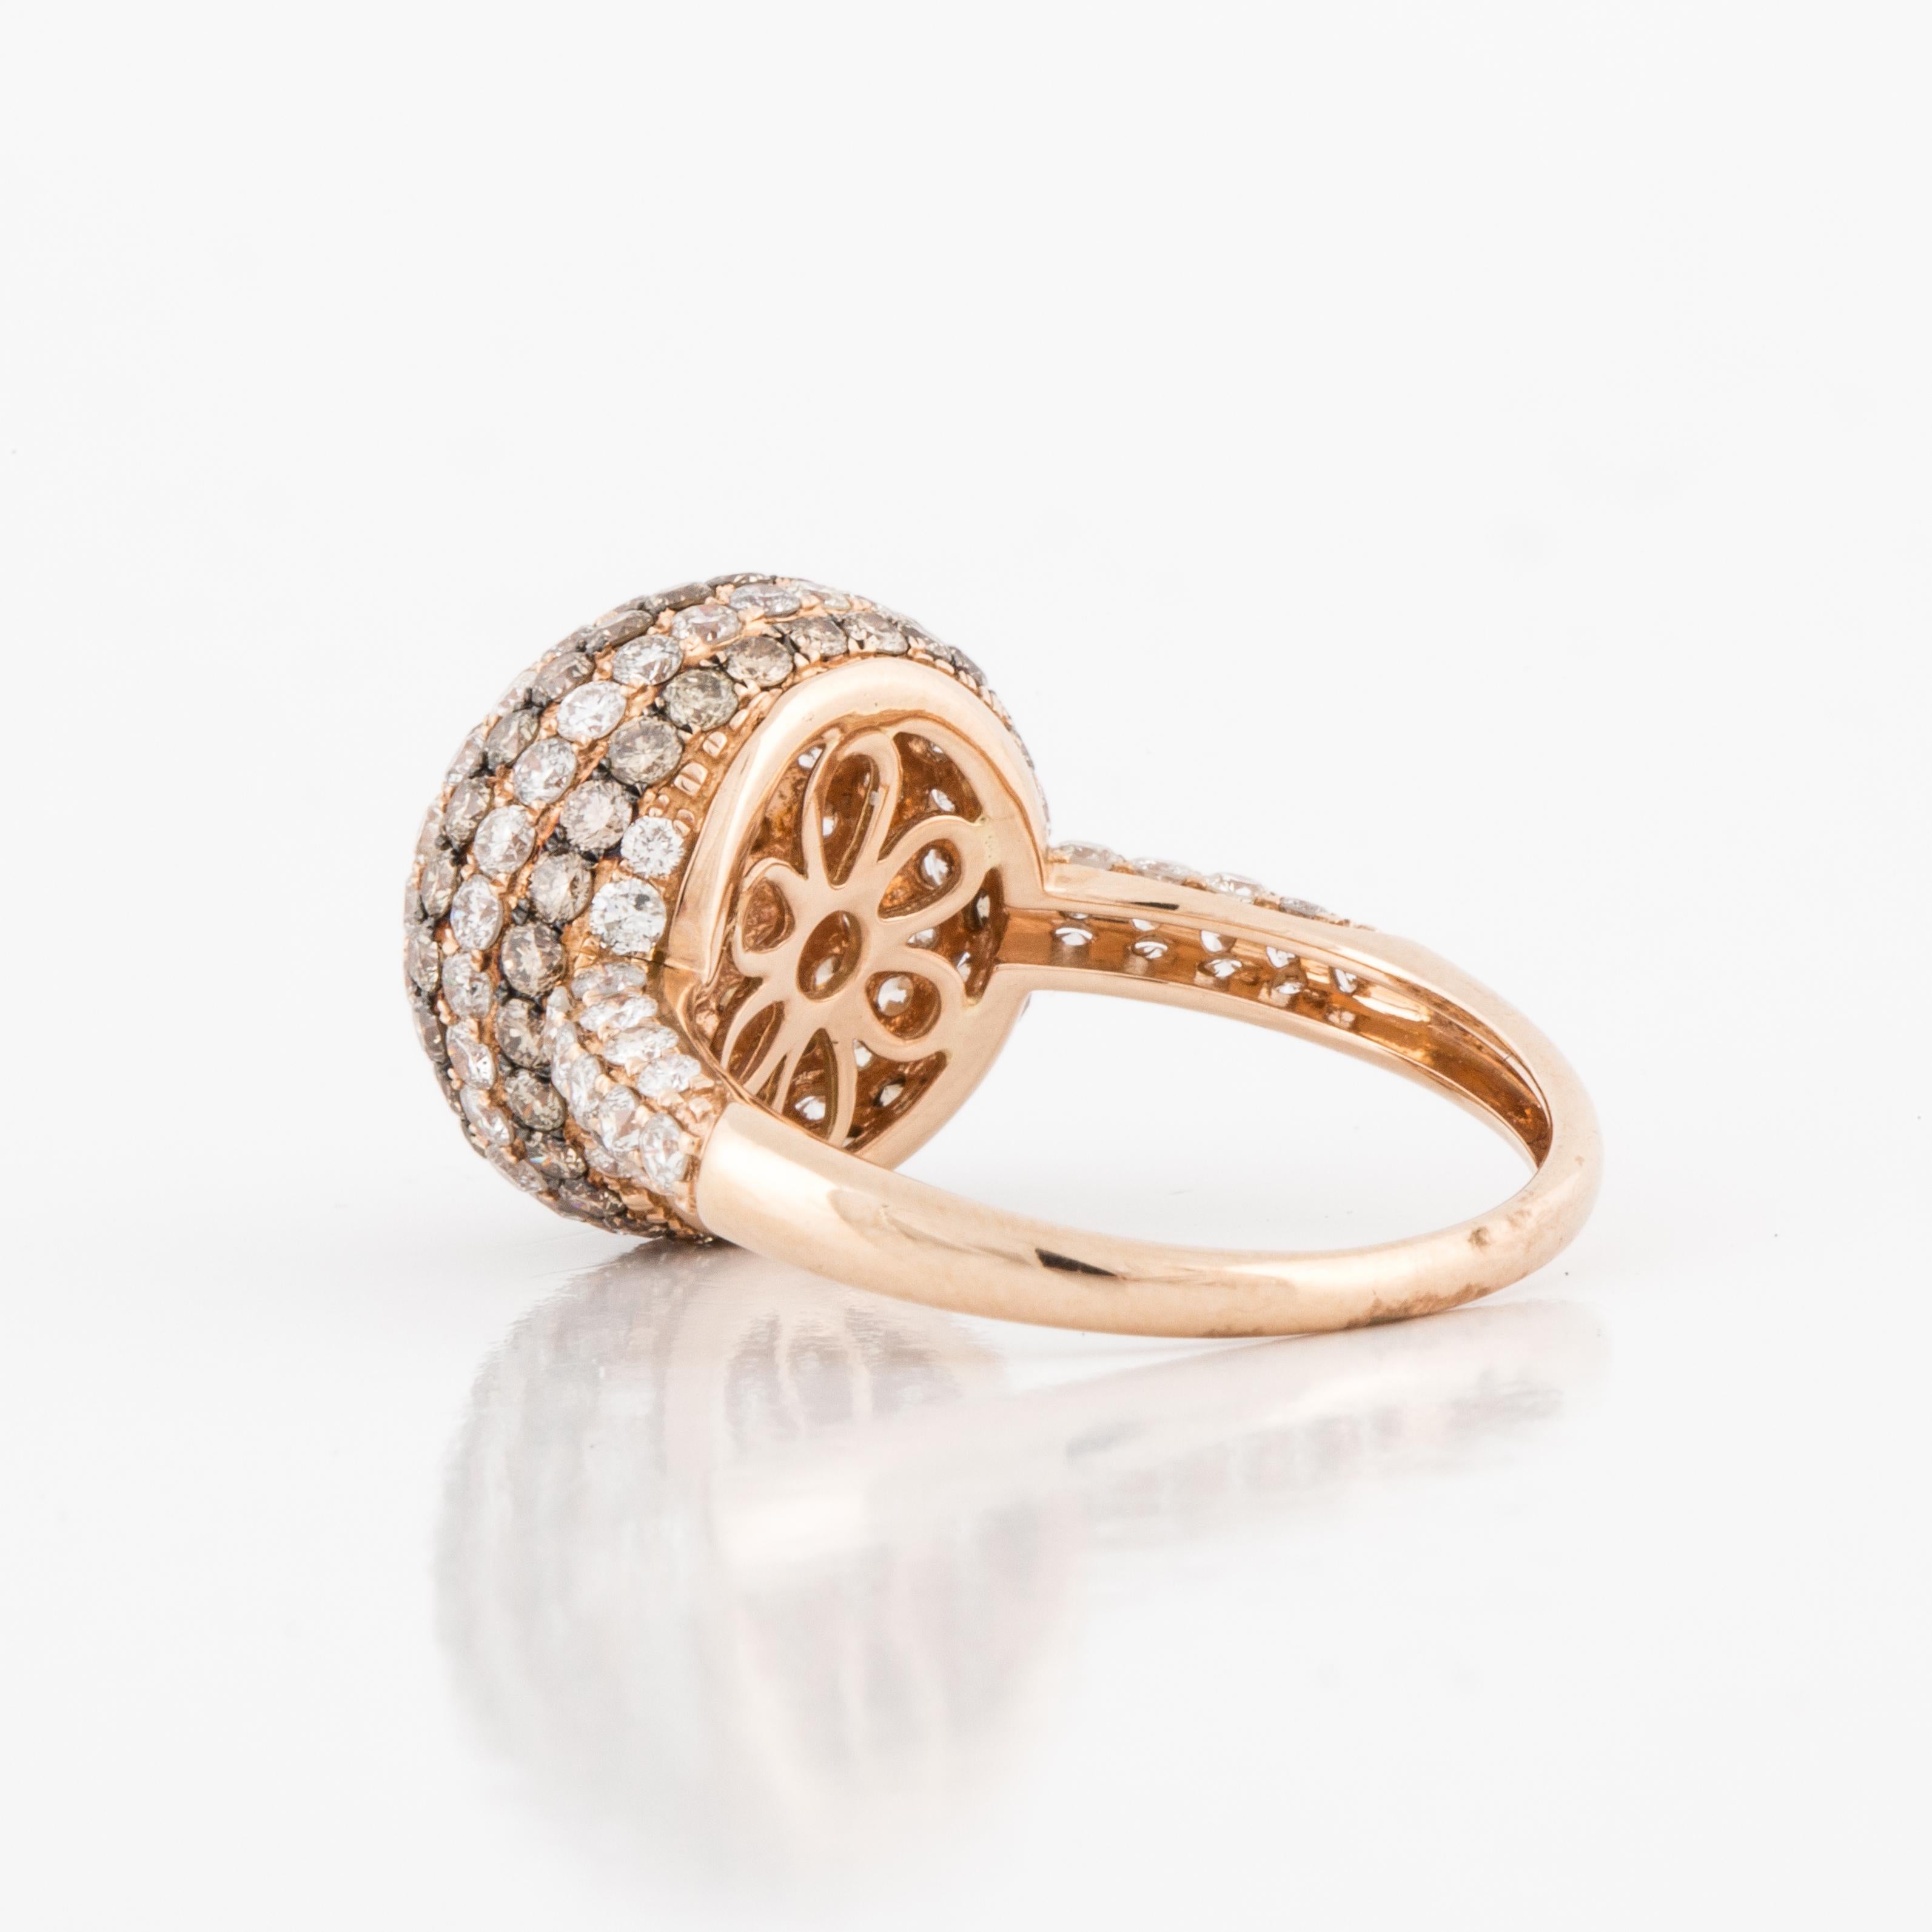 Round Cut 14K Rose Gold White and Brown Diamond Ring